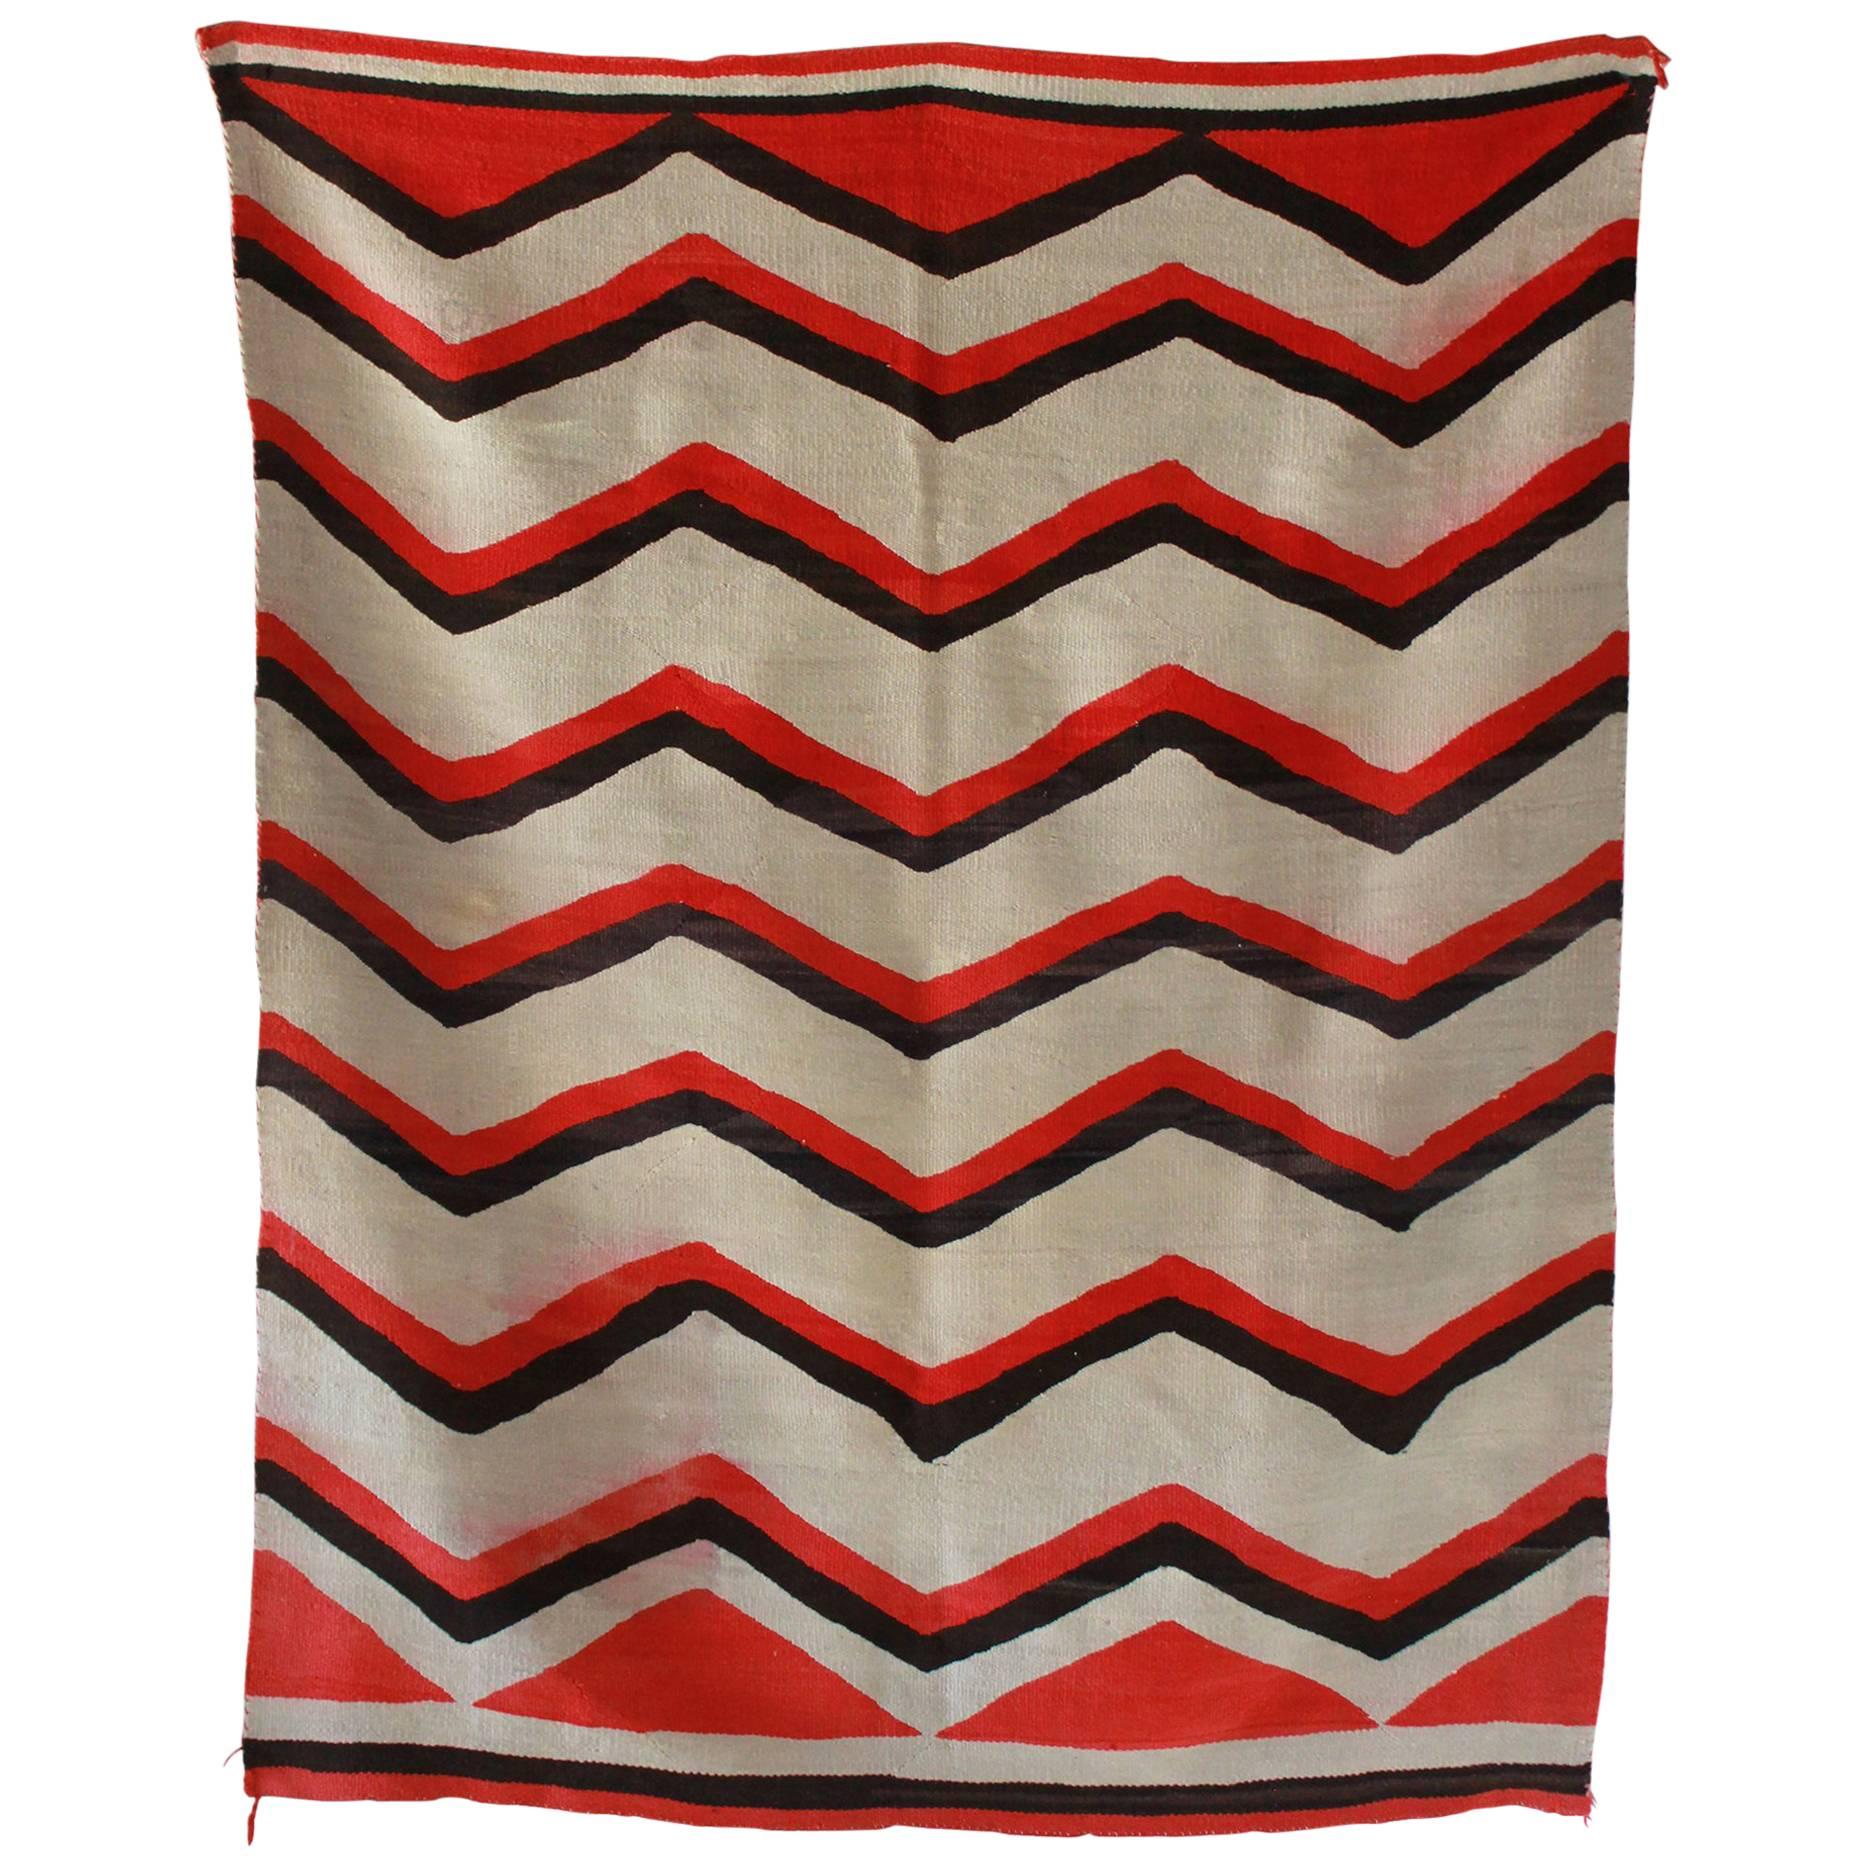 Wool Chevron Pattern Red and Brown Vintage Textile